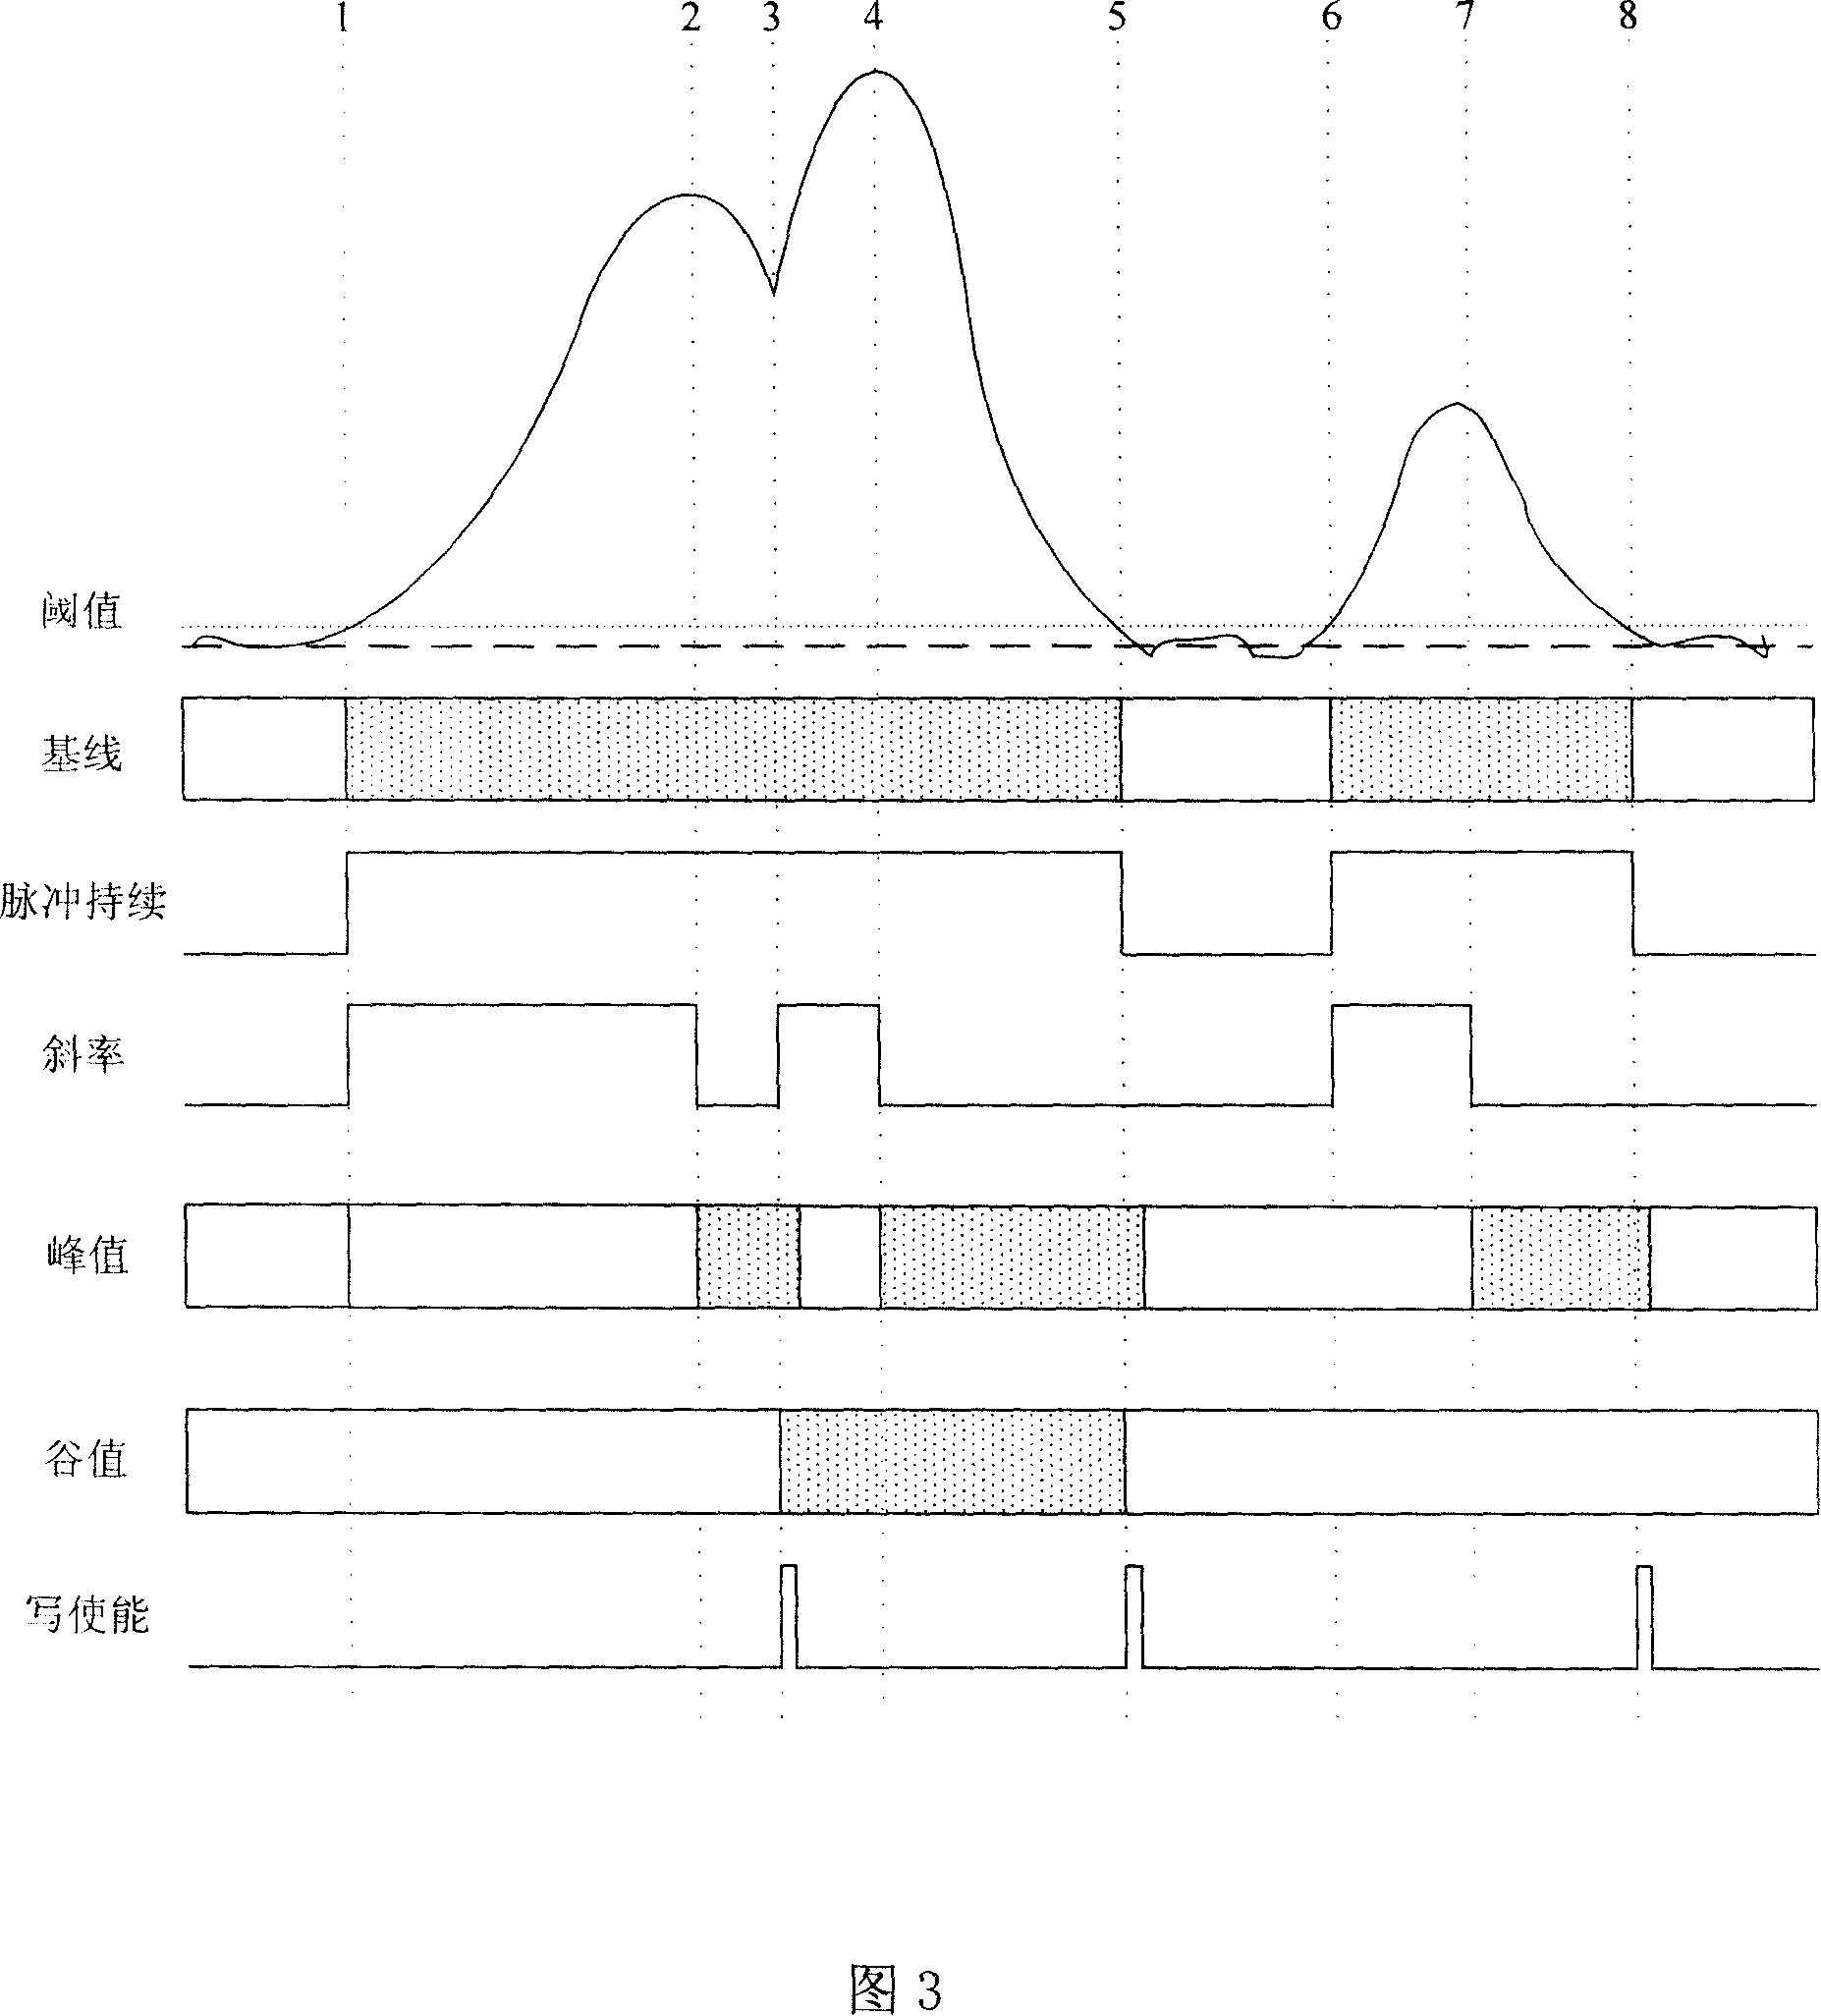 Pulsing signal recognition device and method